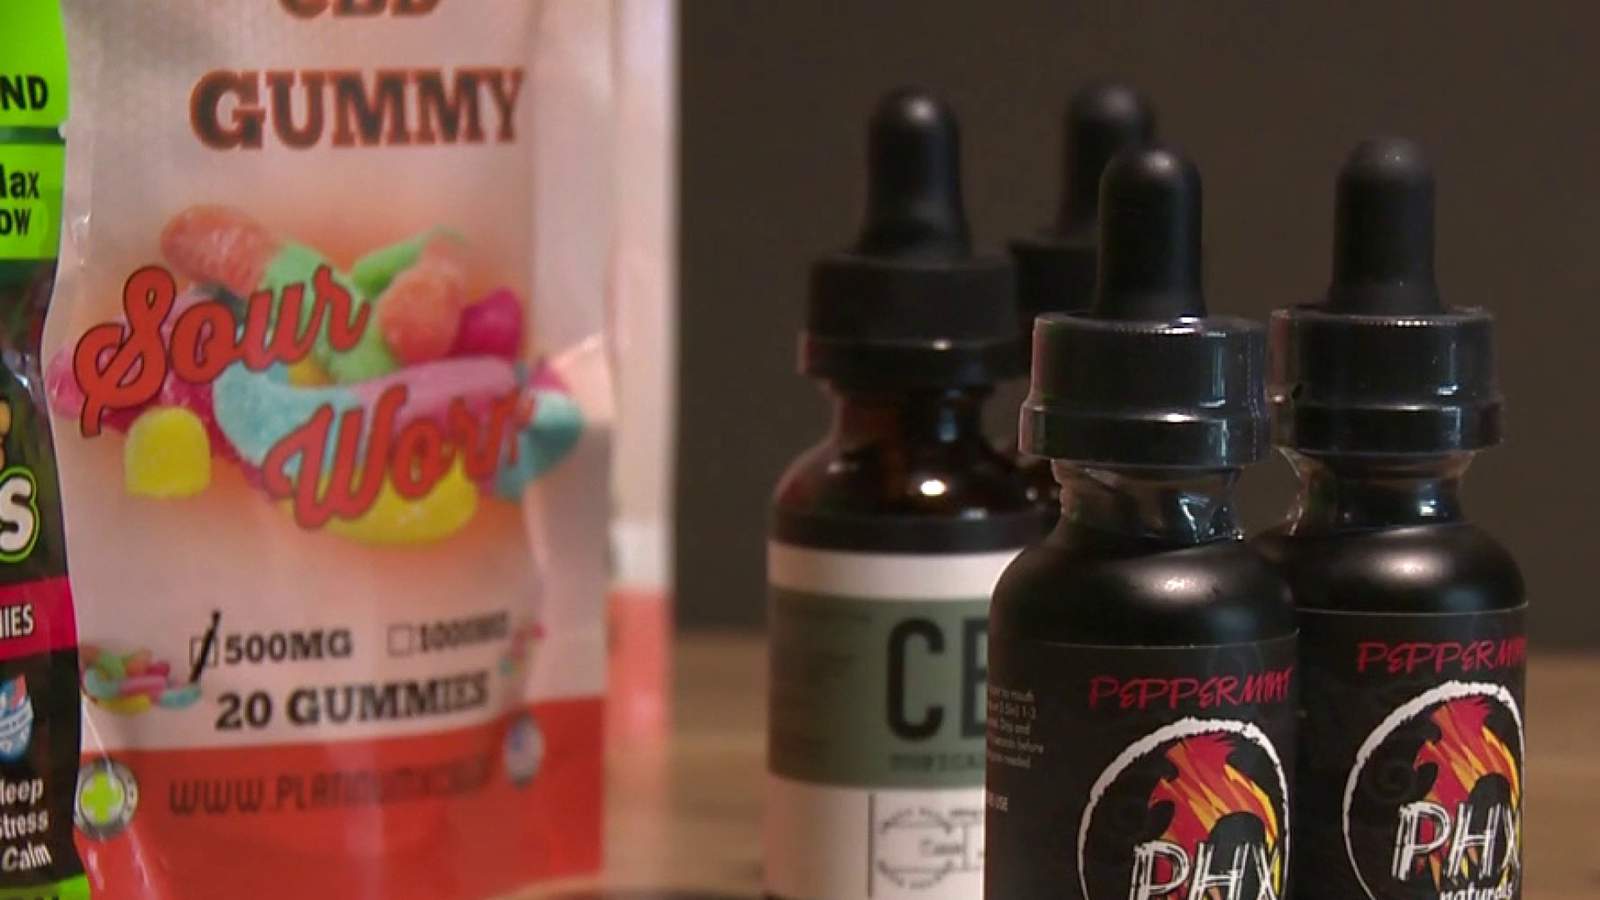 News @ 9 Business Briefing: Can CBD cause you to fail a drug test?